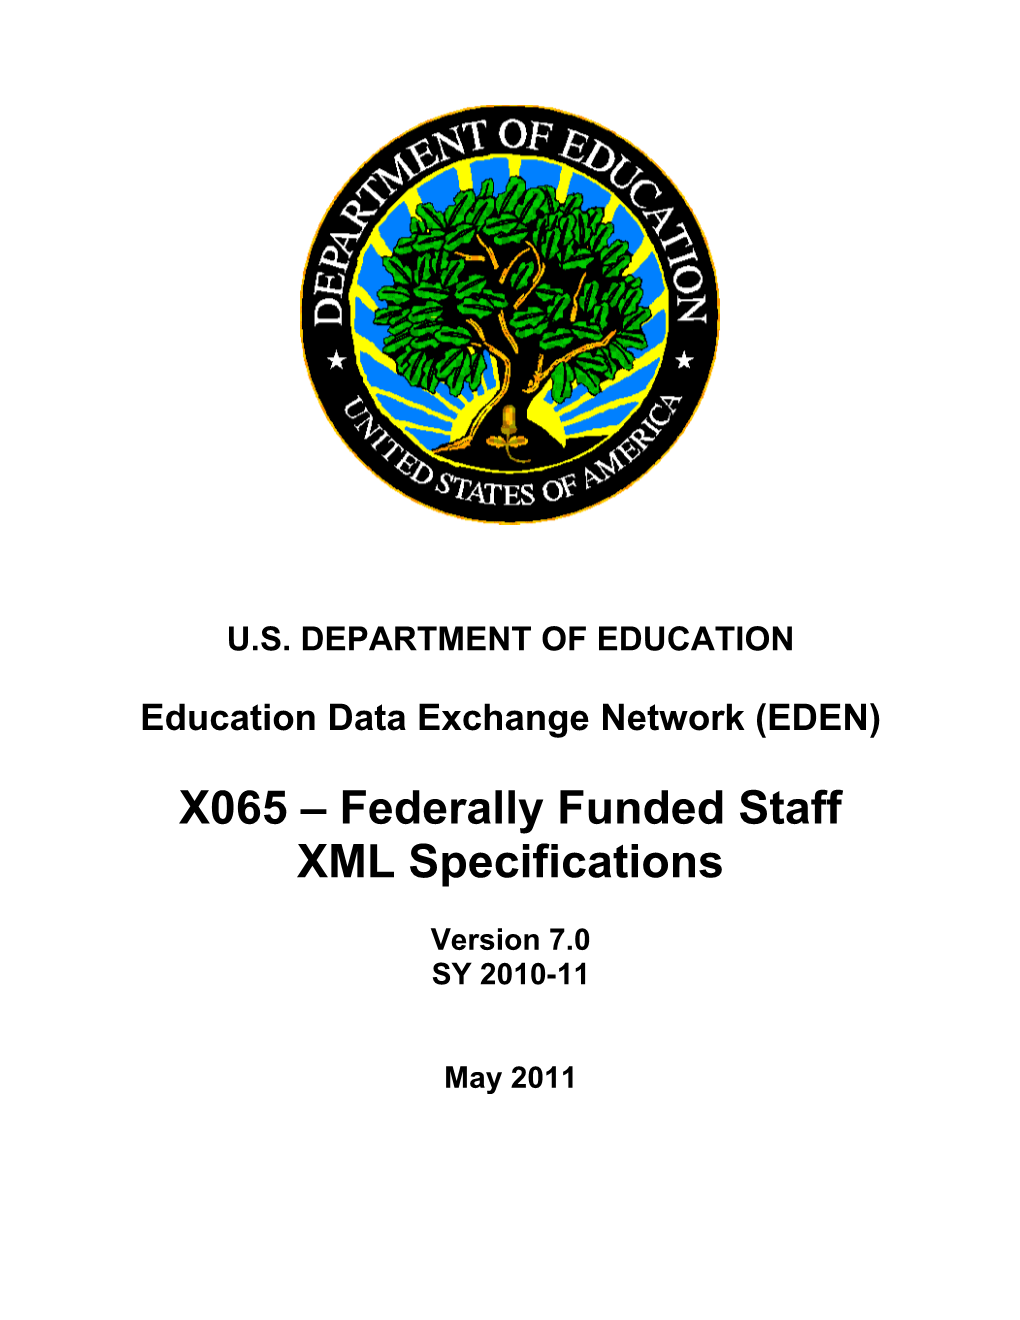 Federally Funded Staff XML Specifications